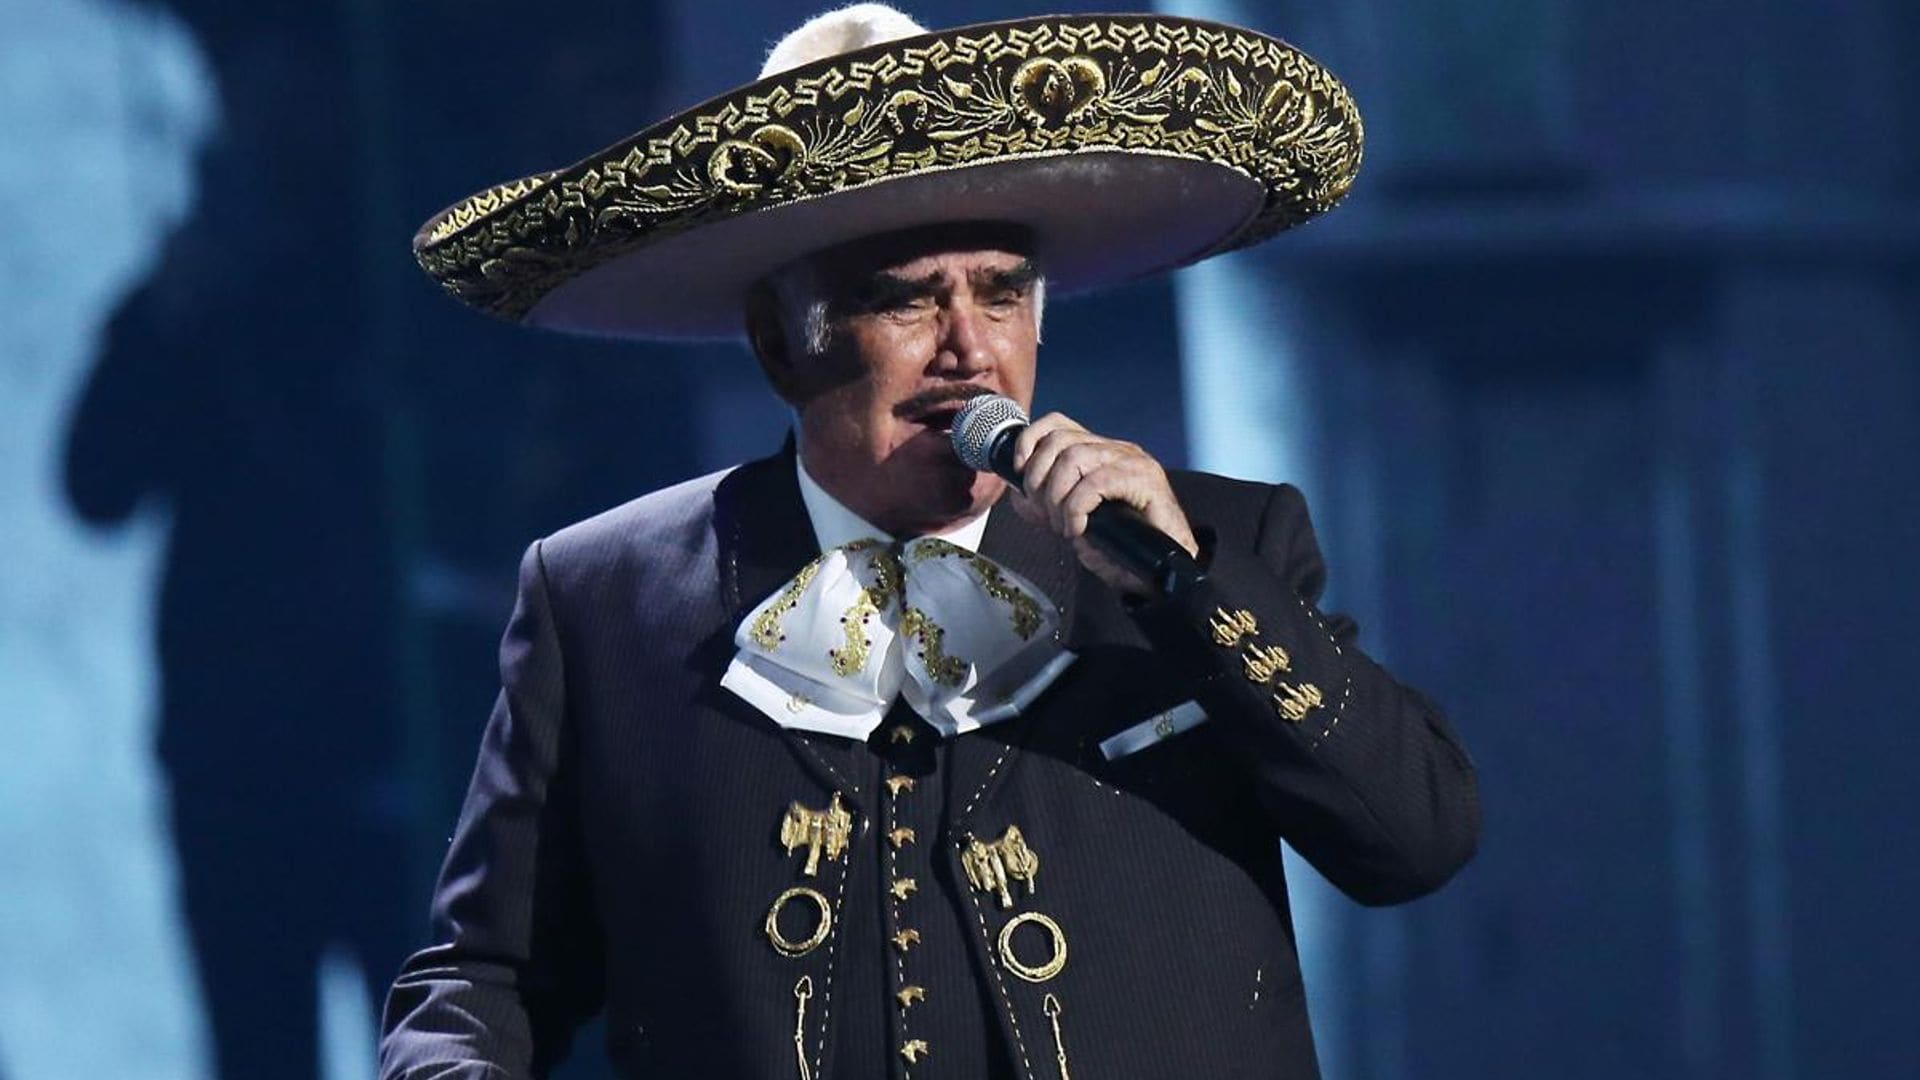 Vicente Fernández wins the Grammy for Best Regional Mexican Music Album 4 months after his death